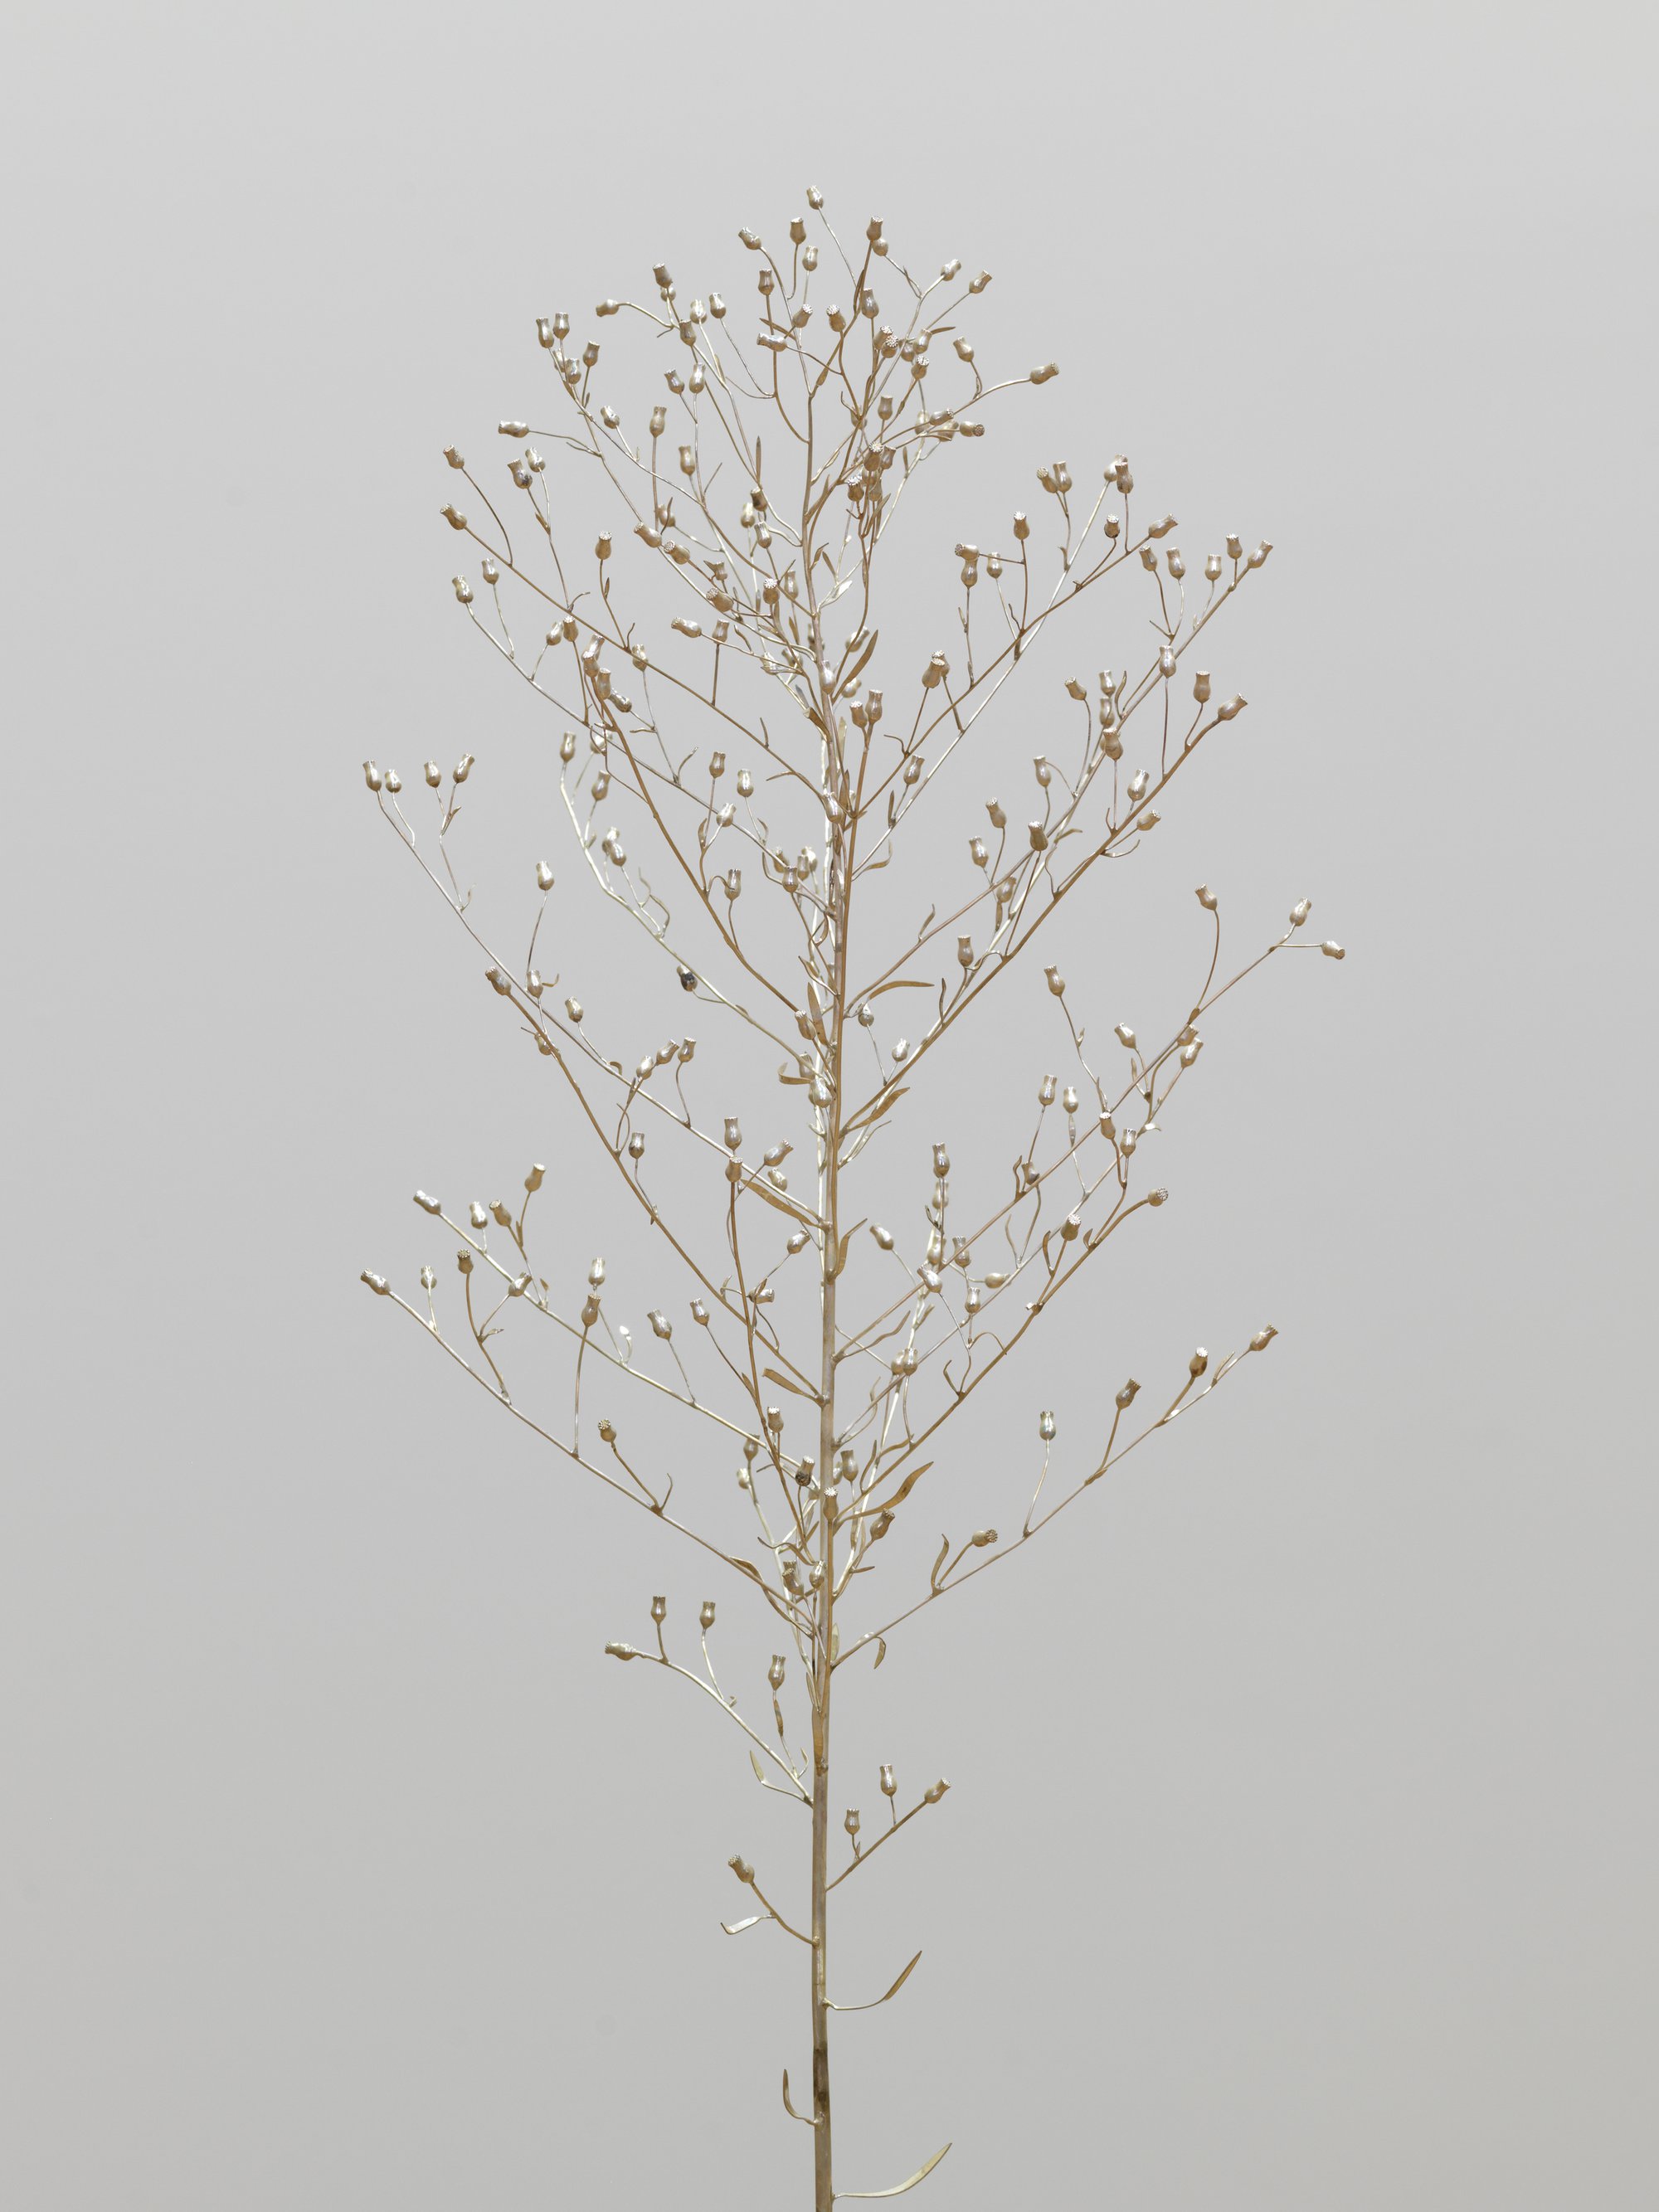 Christodoulos Panayiotou, Horseweed, detail, sterling silver sculpture, approx. 130 x 25 x 25 cm (51 1/8 x 9 7/8 x 9 7/8 in), 2021